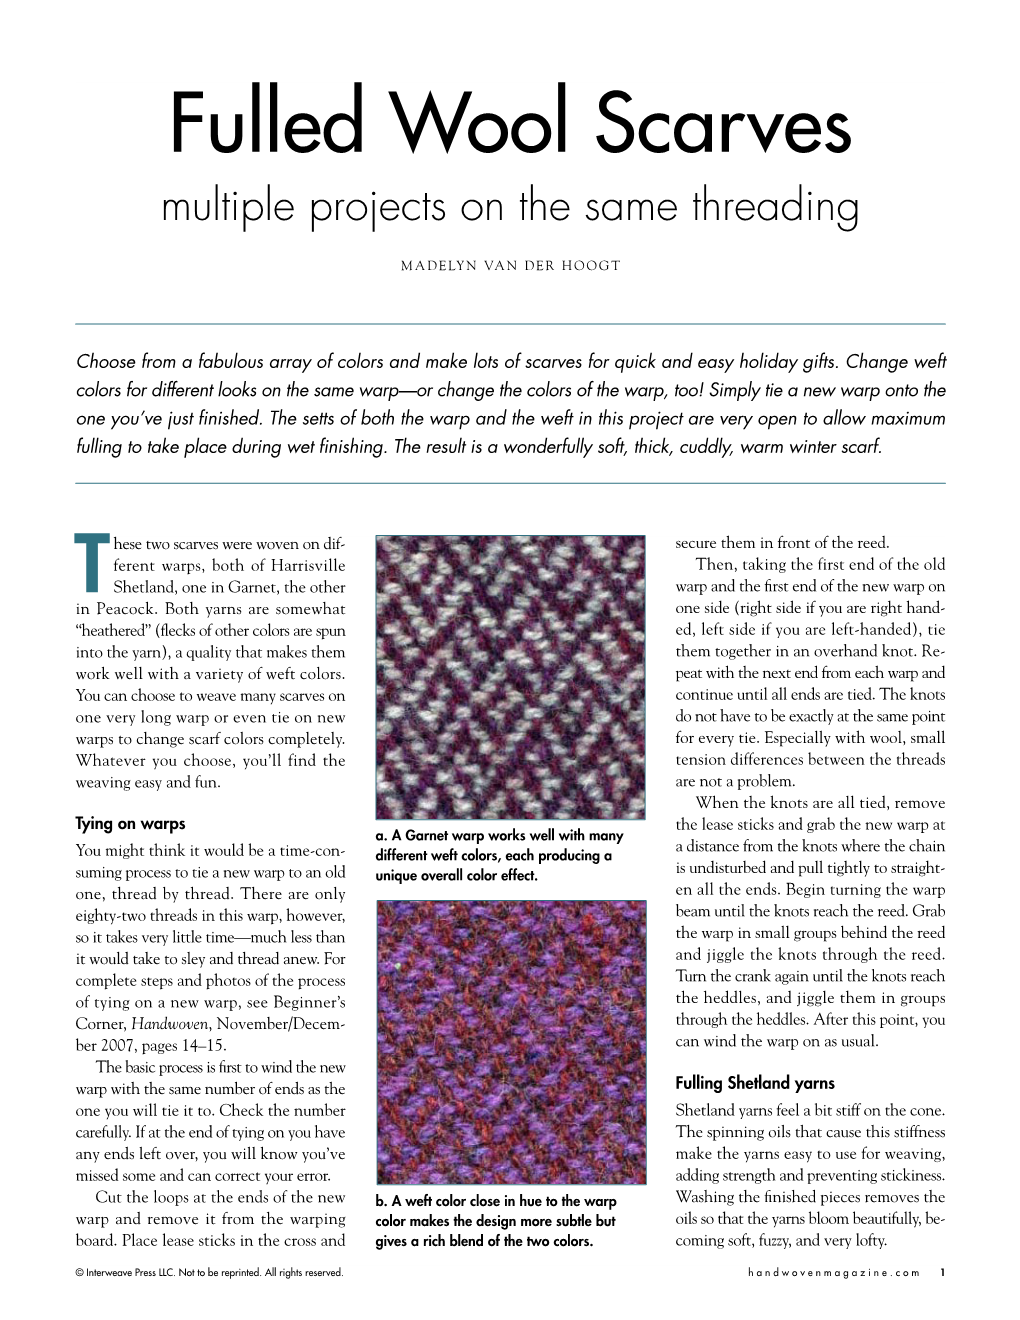 Fulled Wool Scarves Multiple Projects on the Same Threading